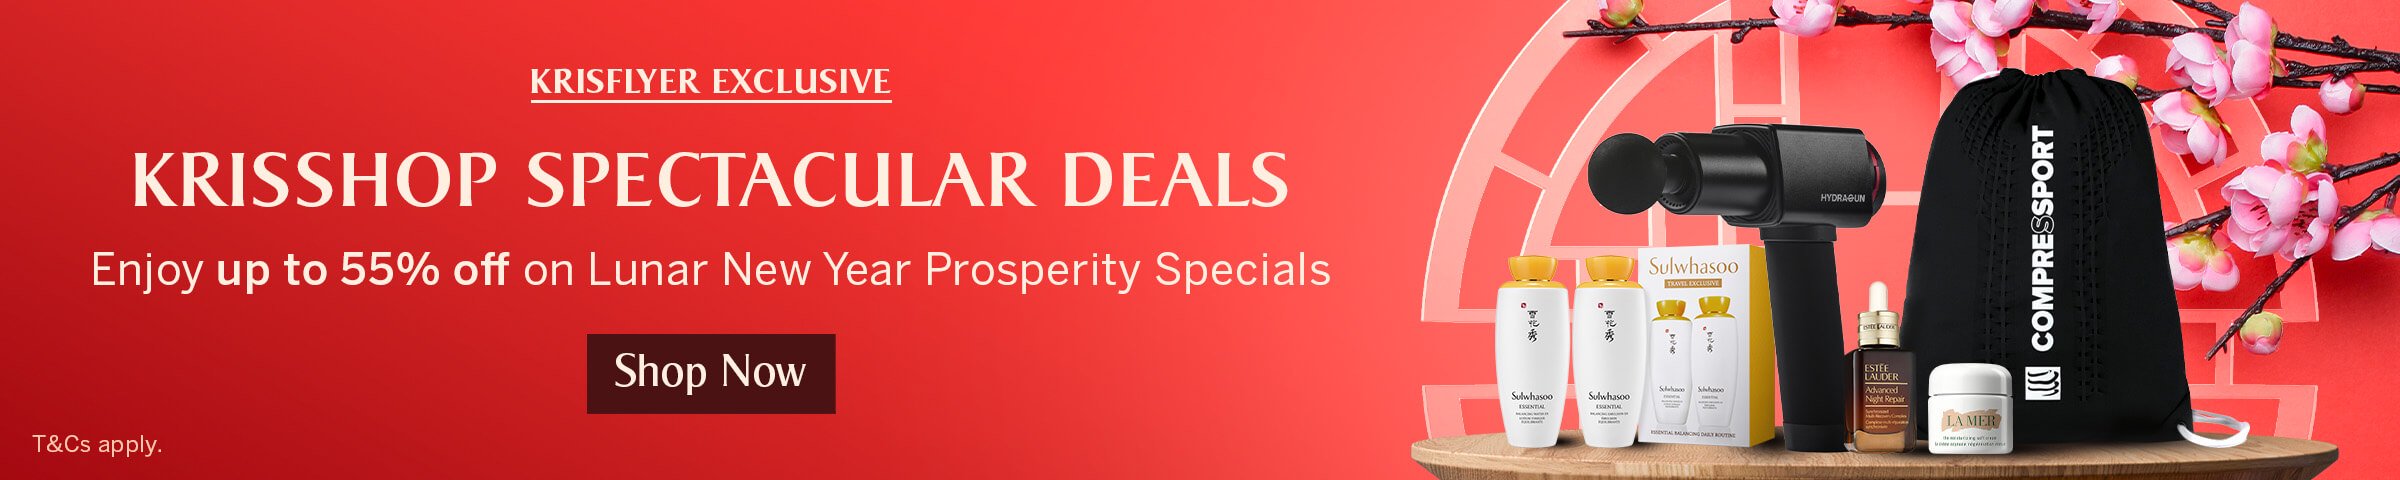 KrisShop's Spectacular Deals - Up to 55% off Lunar New Year Prosperity Specials